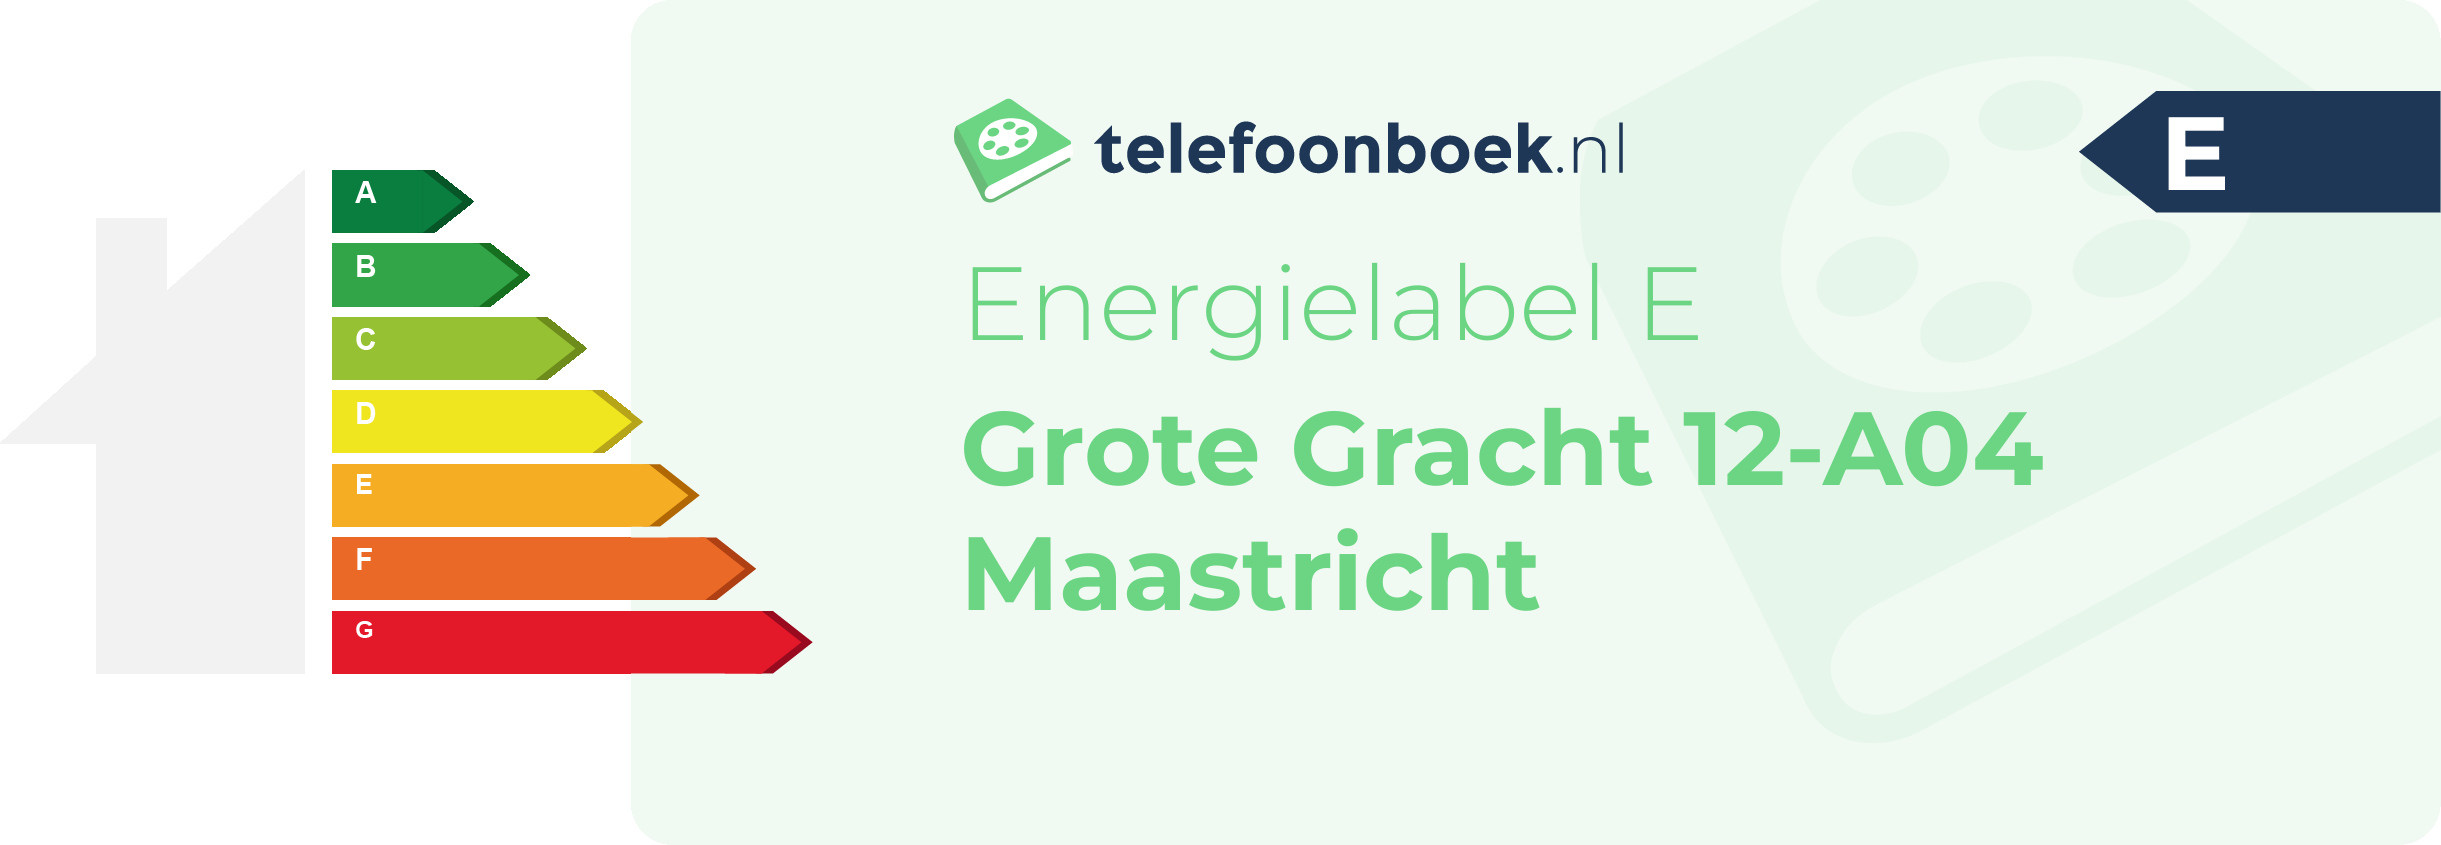 Energielabel Grote Gracht 12-A04 Maastricht